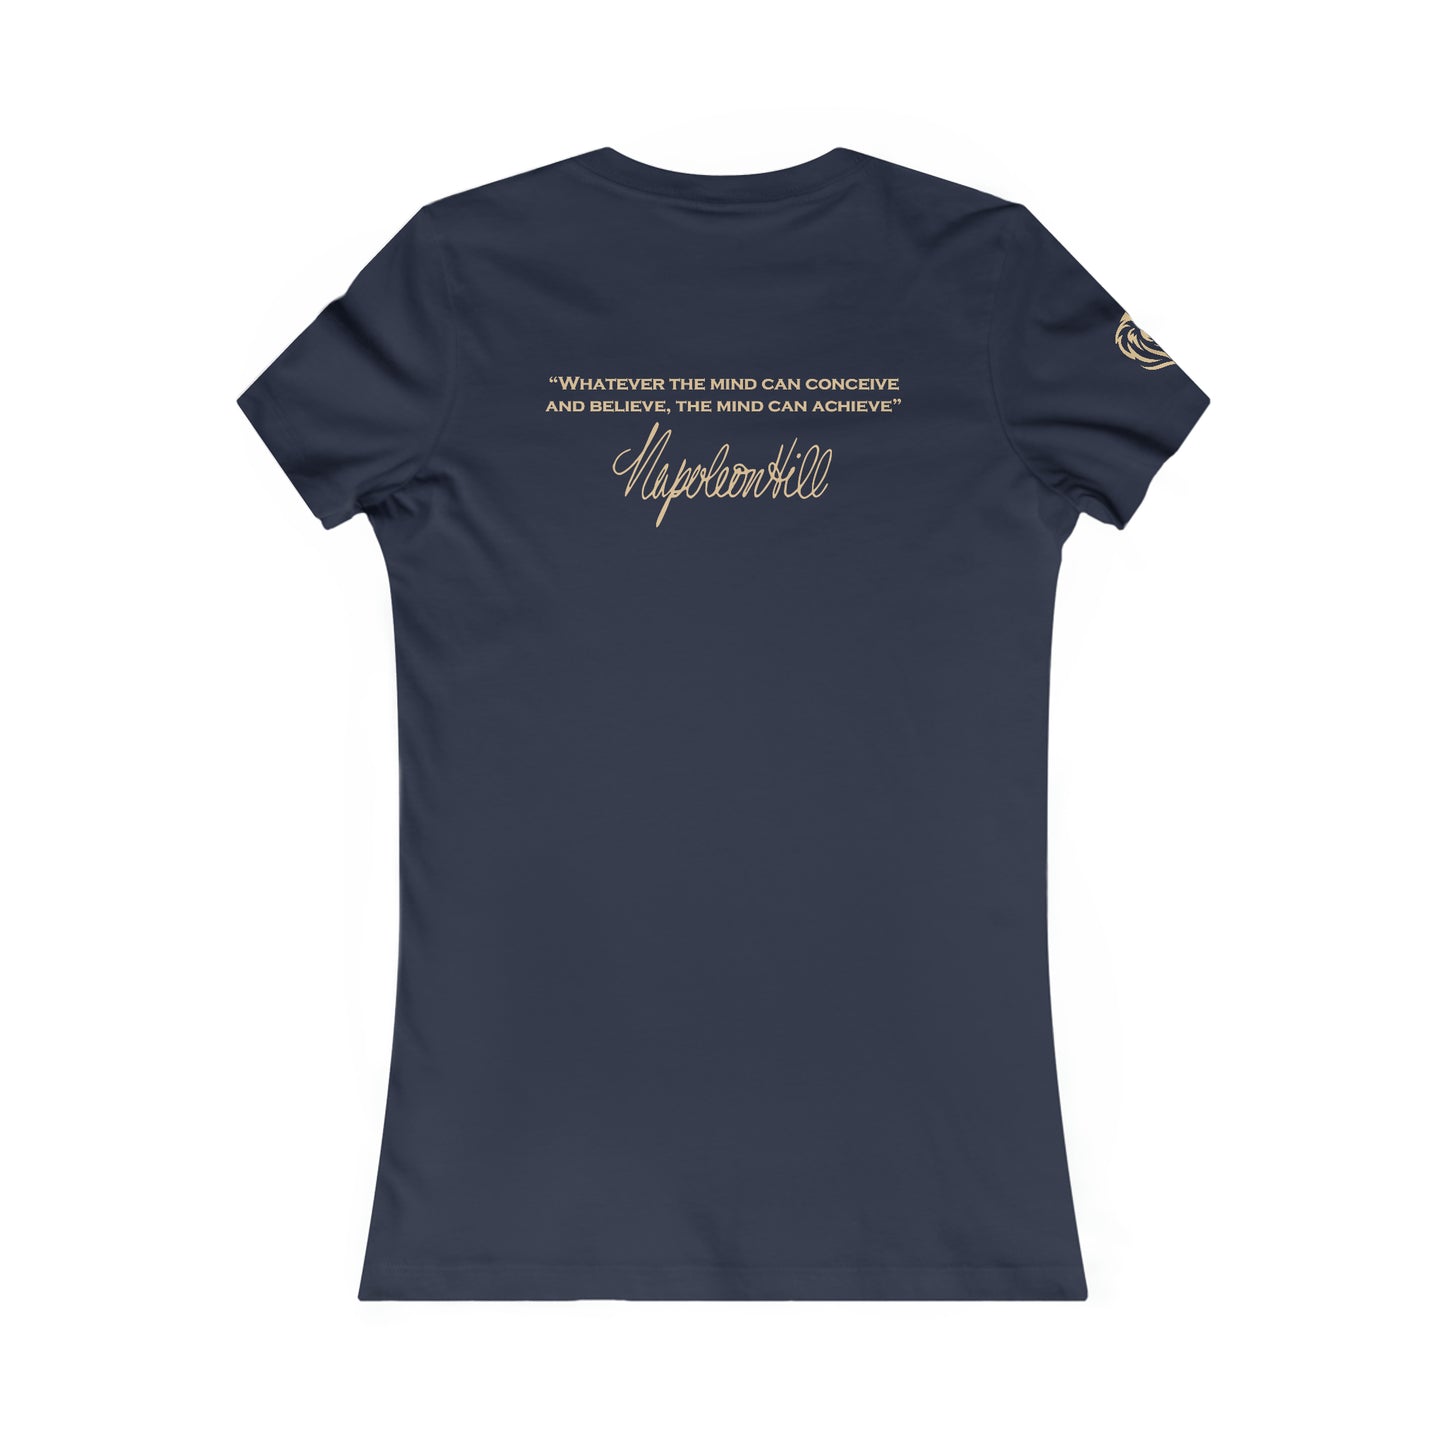 Napoleon Hill Institute T-shirt for Women (Europe shipping)